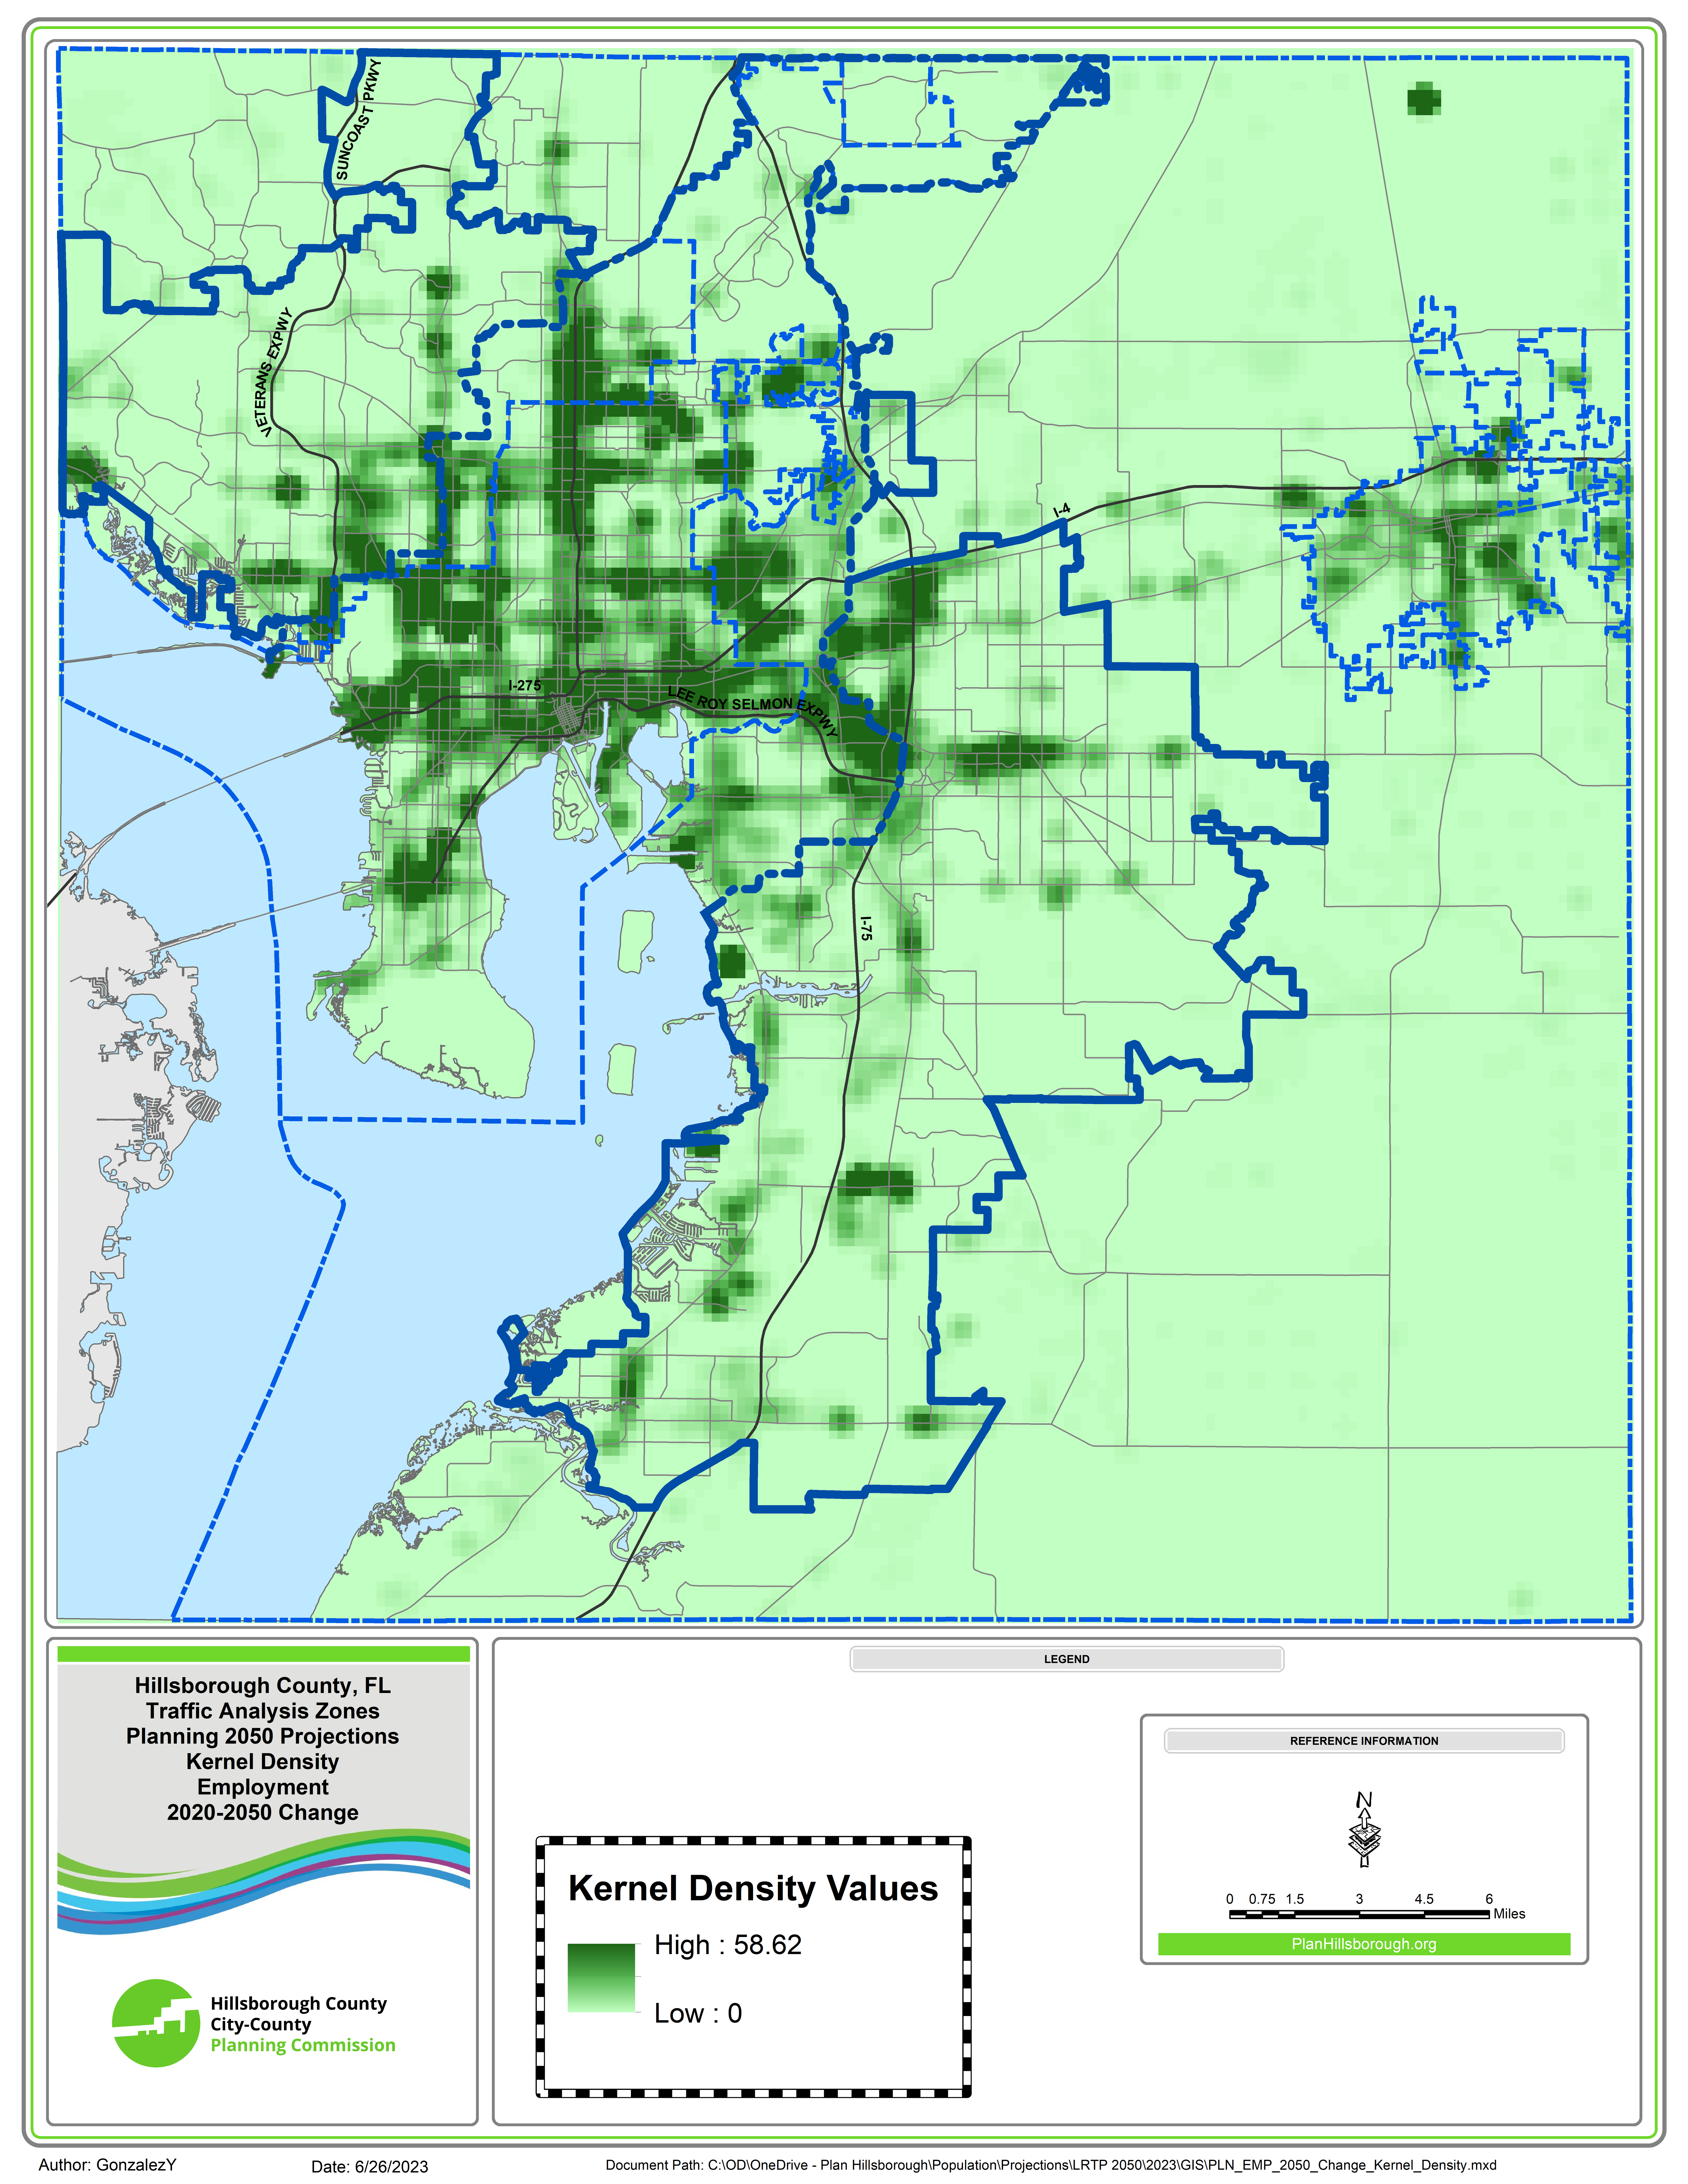 Map shows Kernel Density of new jobs per acre through 2050. Darker green means more new jobs. As expected most new jobs will located in commercial corridors (e.g. I-275, Dale Mabry Blvd., Adamo Drive).